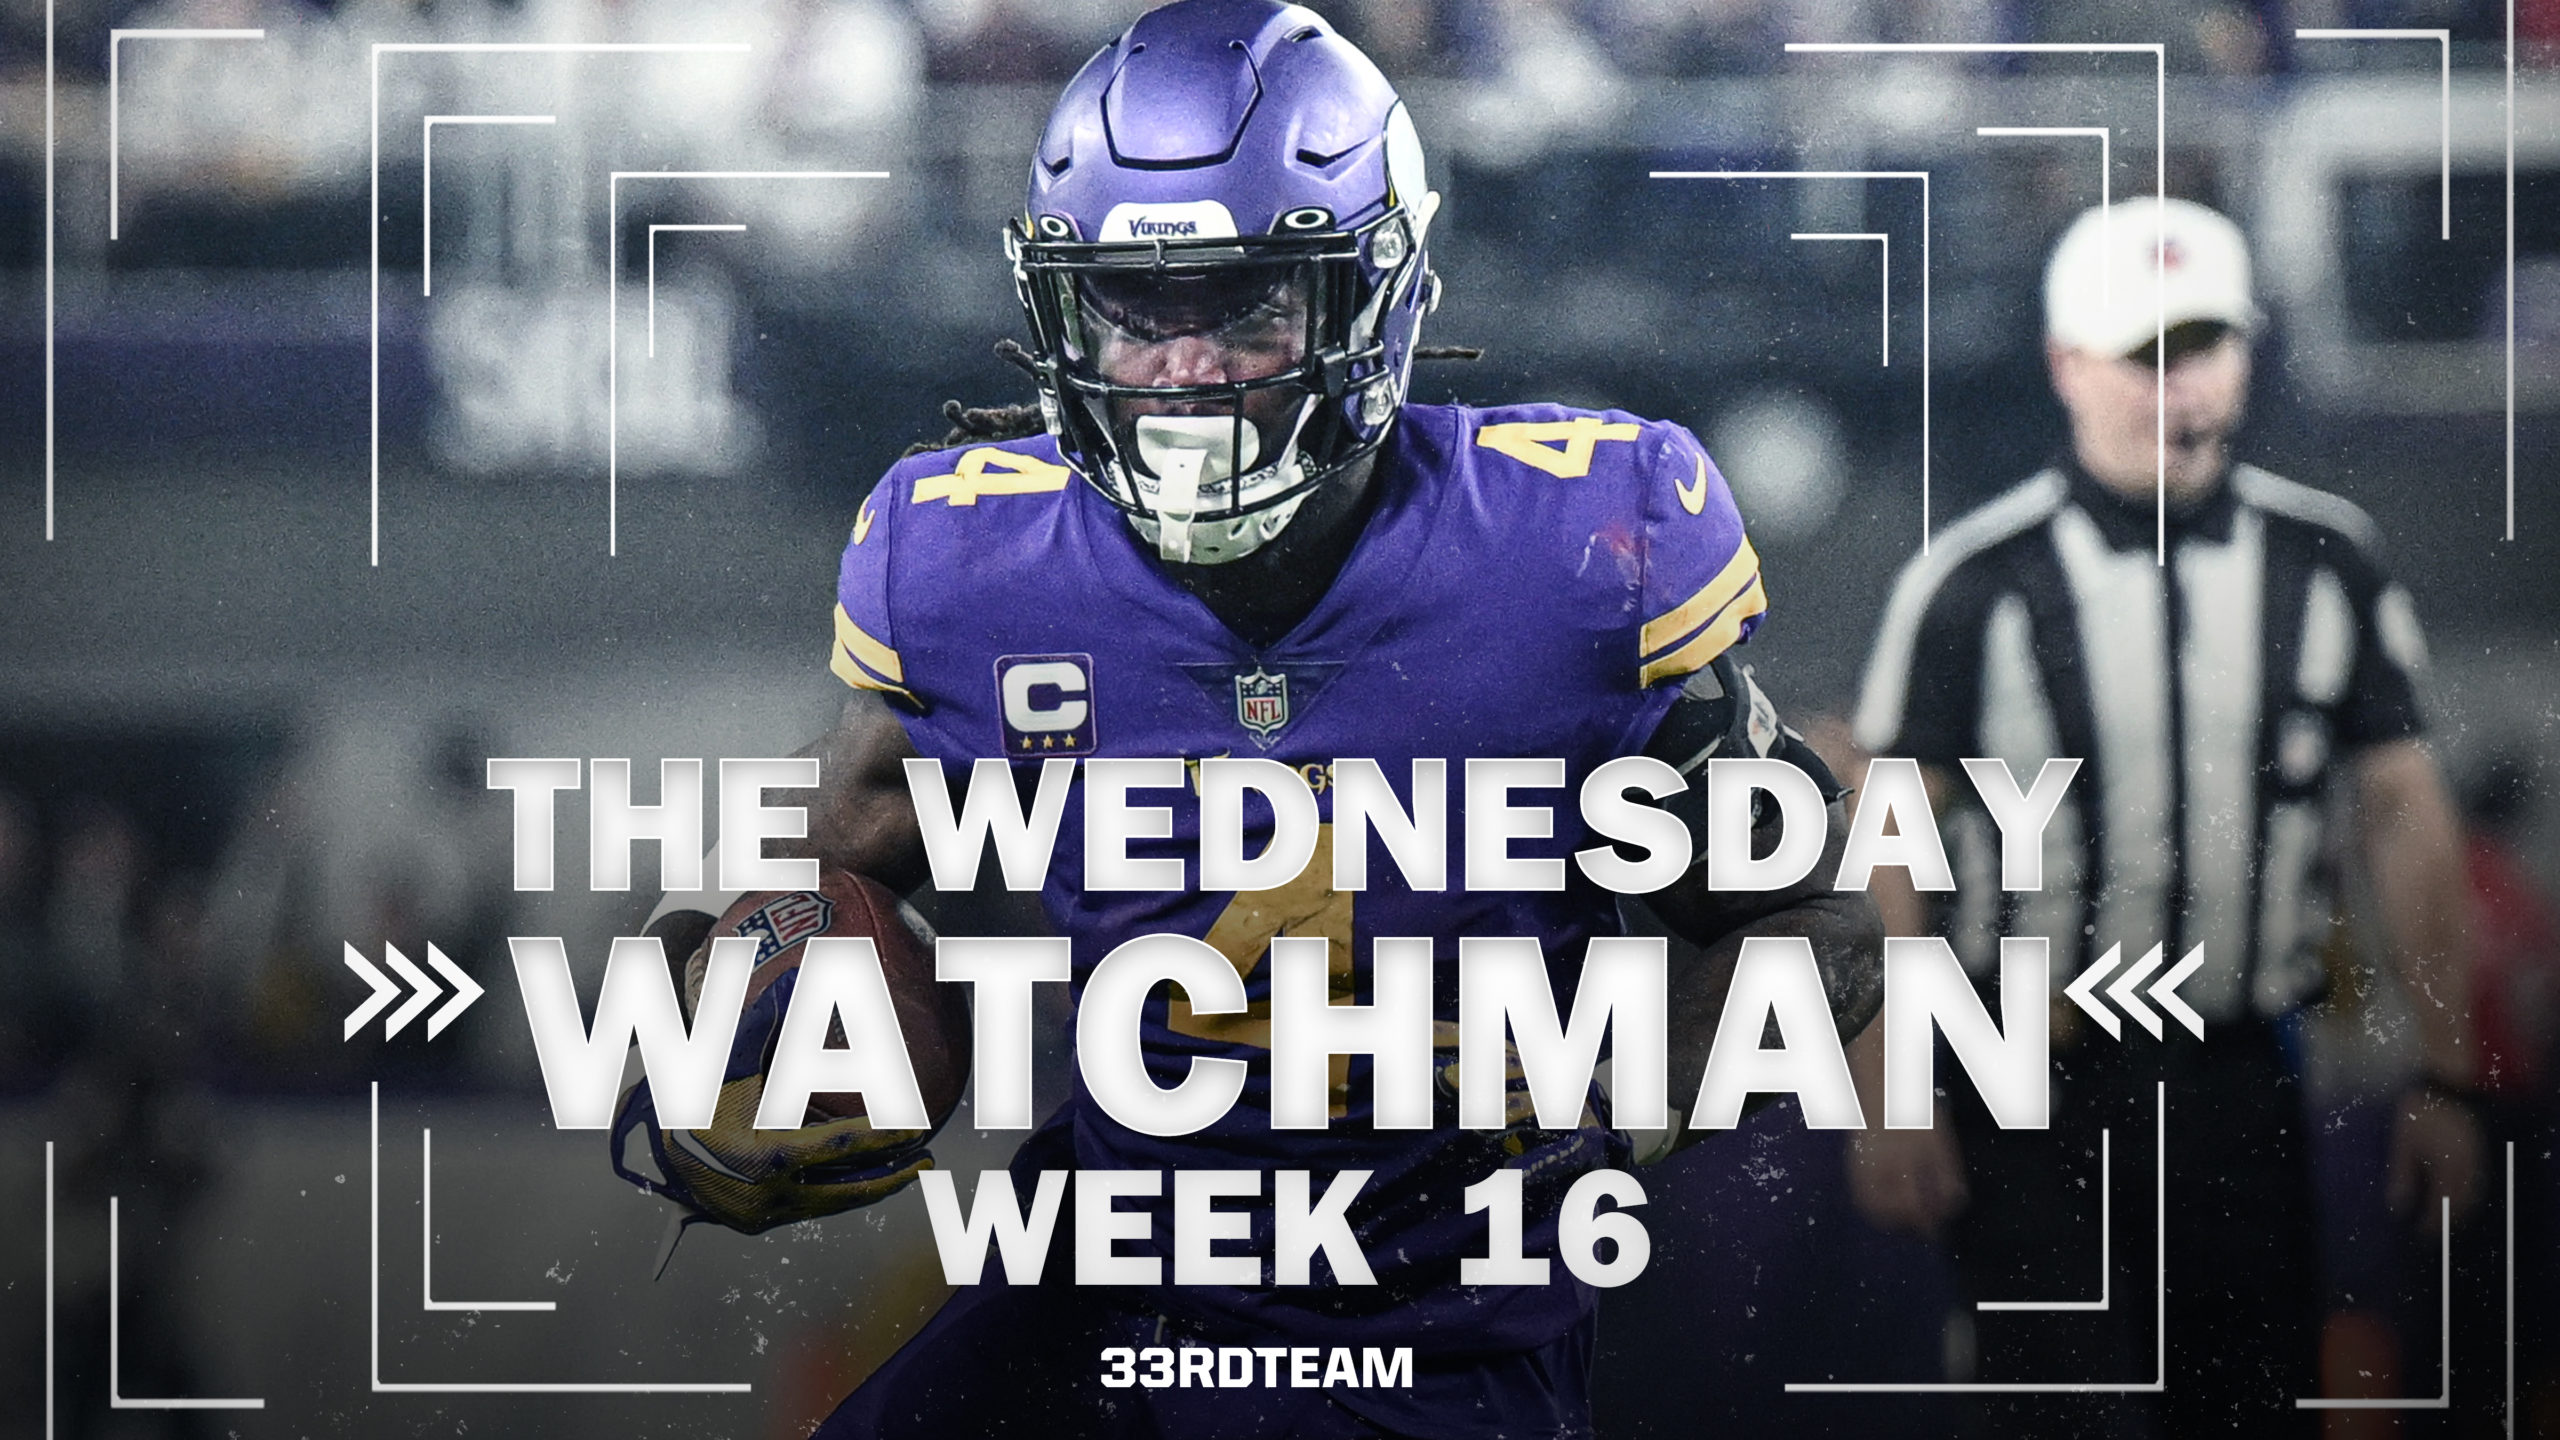 The Wednesday Watchman: NFL Week 16 Betting, DFS, Fantasy Information to Know